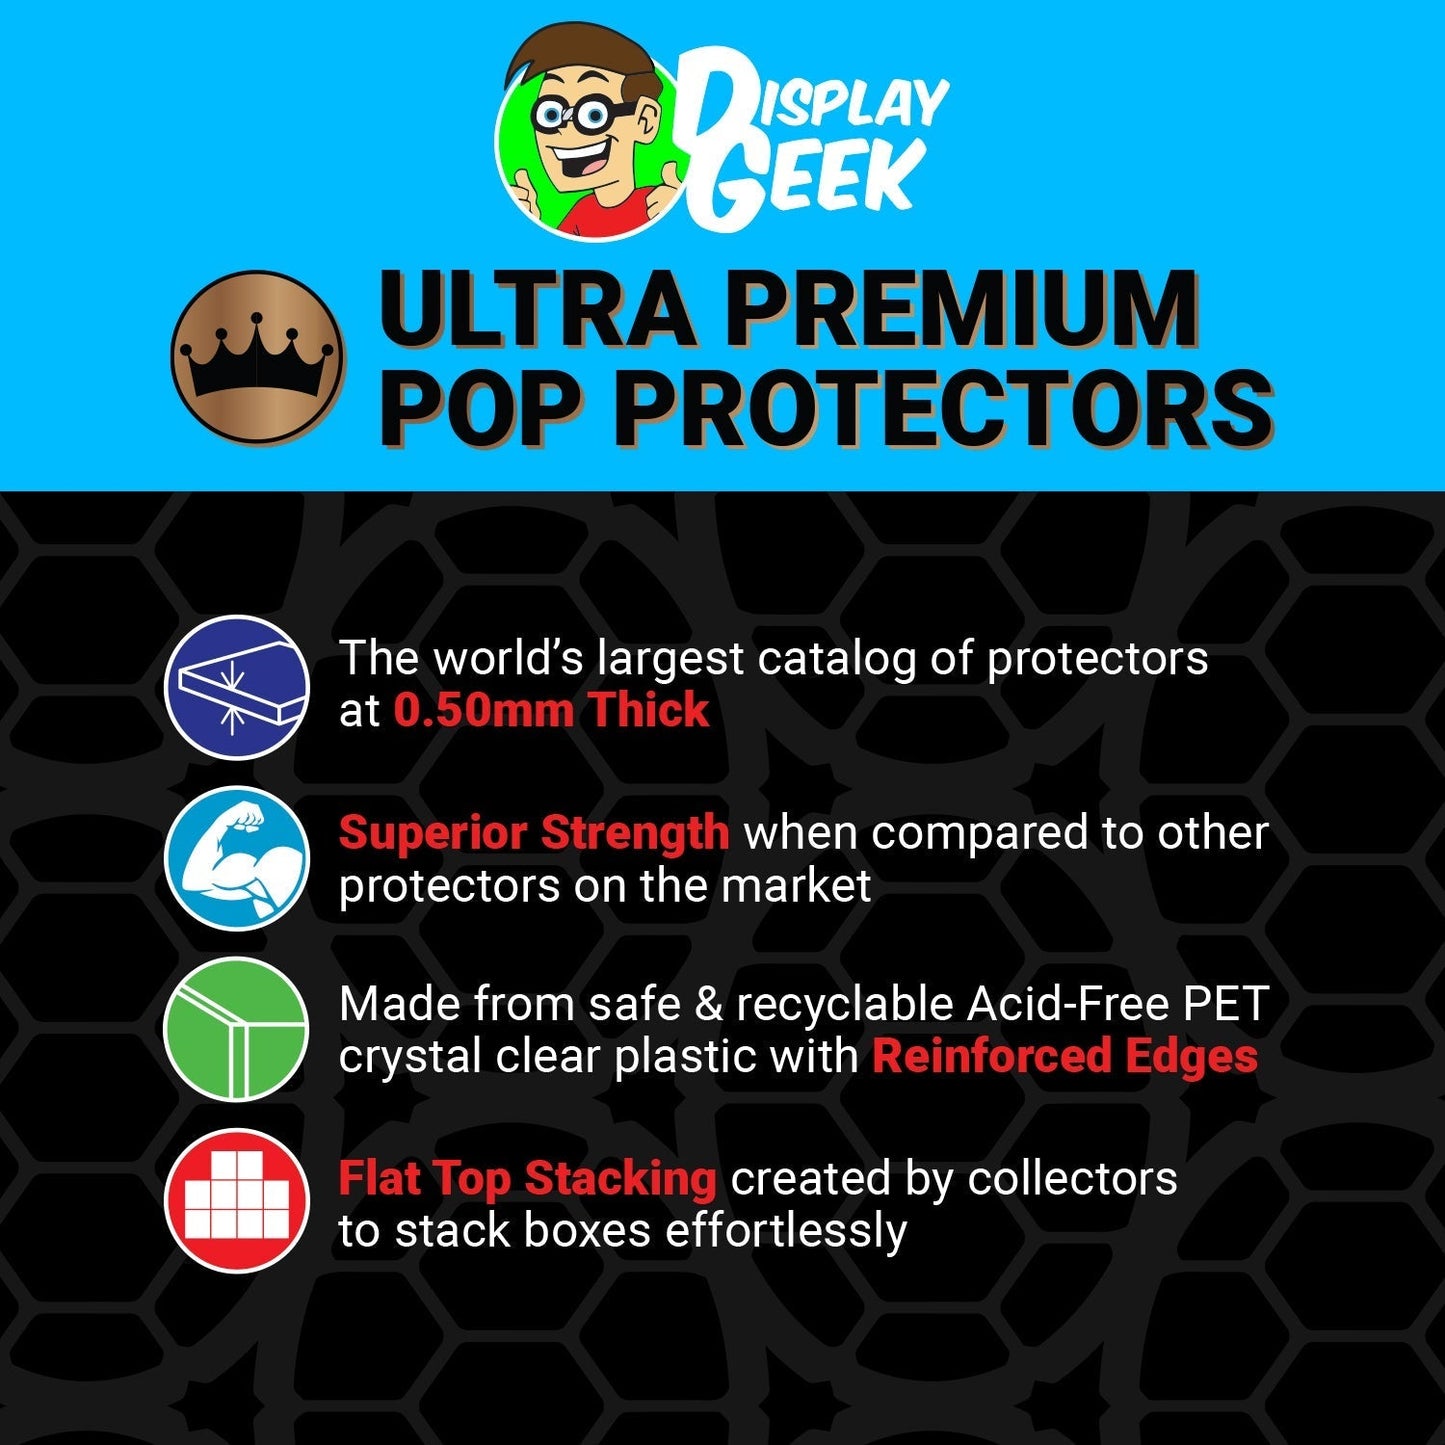 Pop Protector for 9 inch Giant Batman Black Funko Pop - PPG Pop Protector Guide Search Created by Display Geek